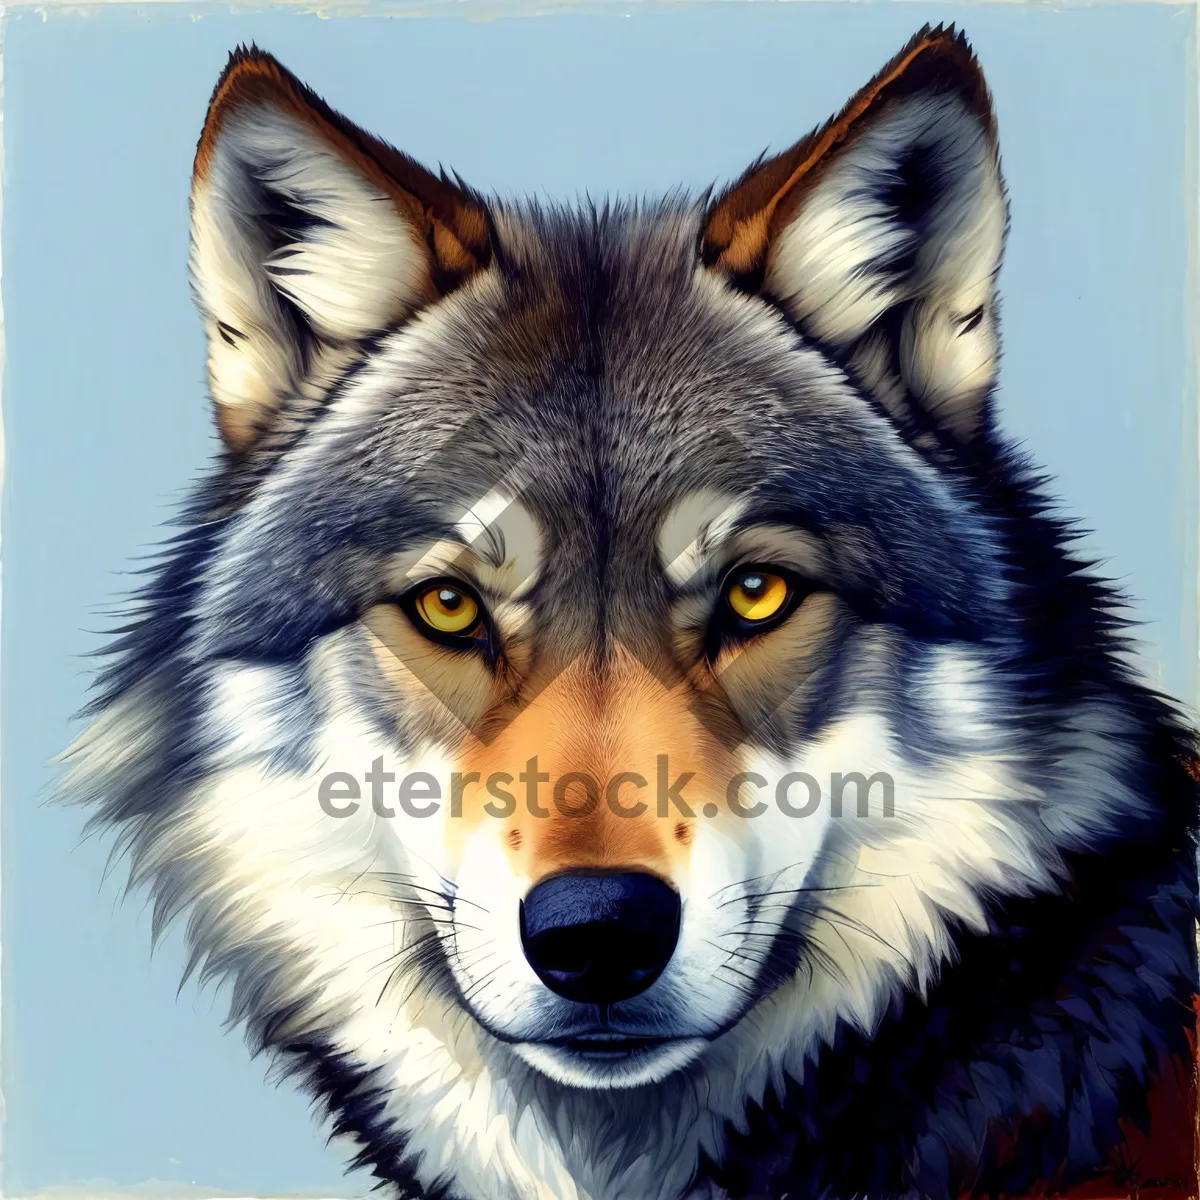 Picture of Majestic Canine Portrait: Domestic Wolf with Intense Eyes